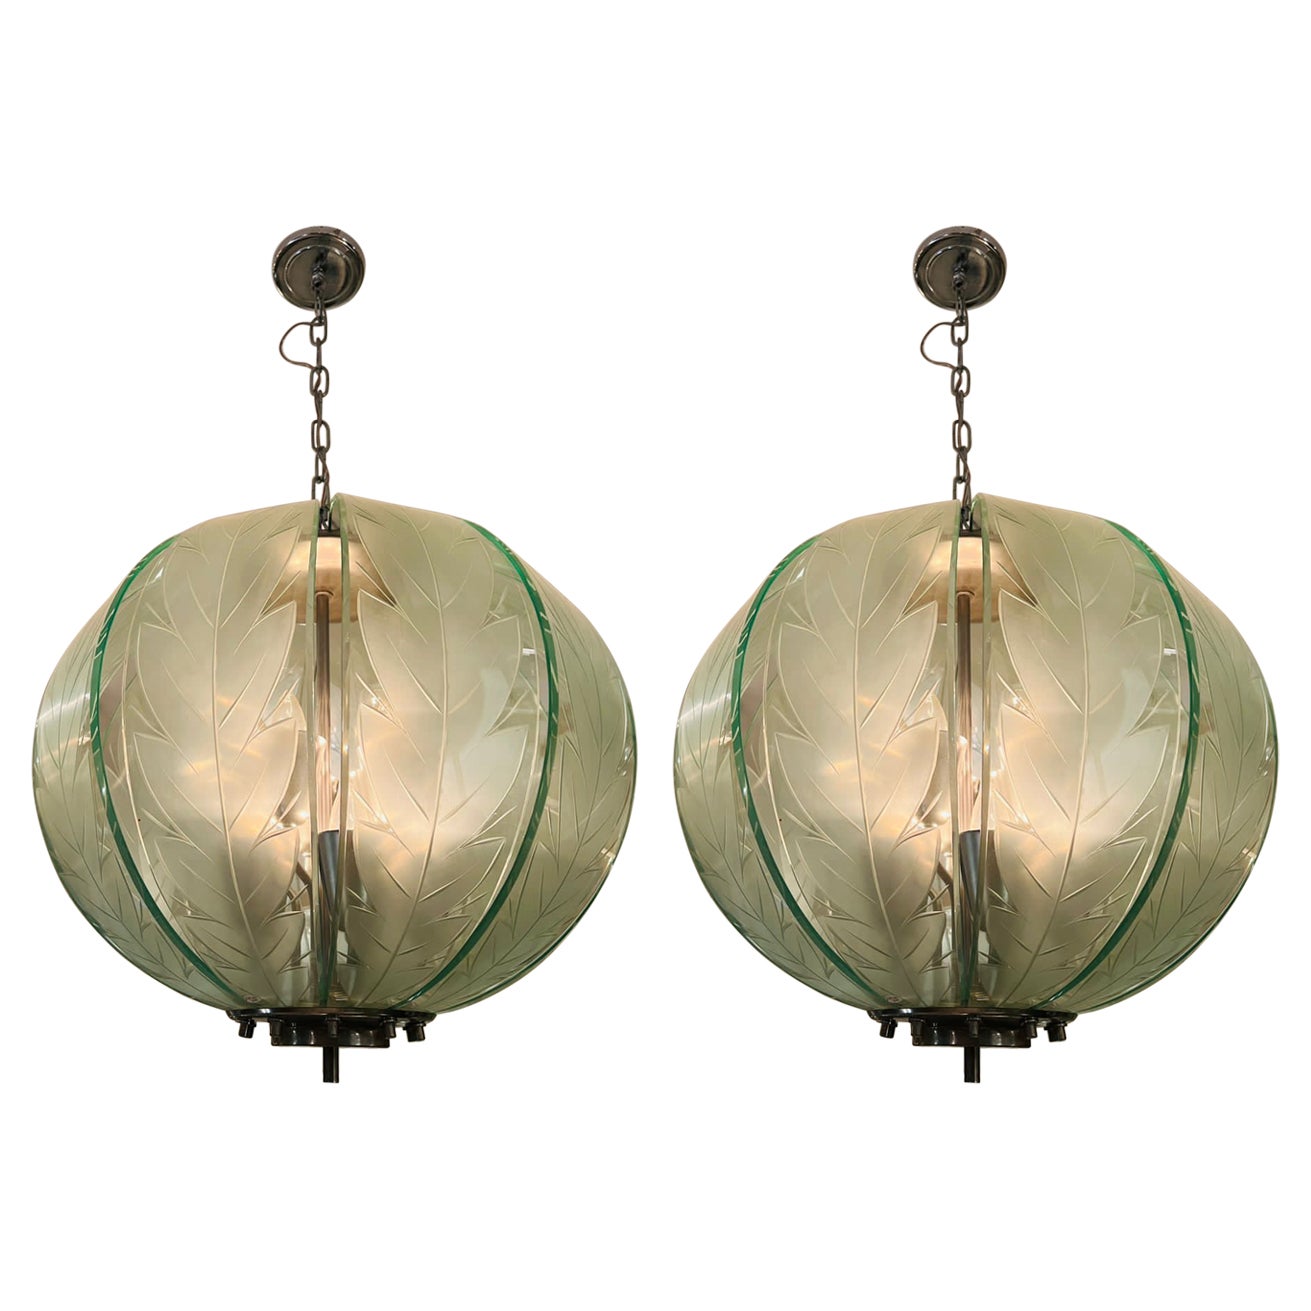 Fontana Arte pair of italian chandeliers in engraved glass and metal circa 1950 For Sale